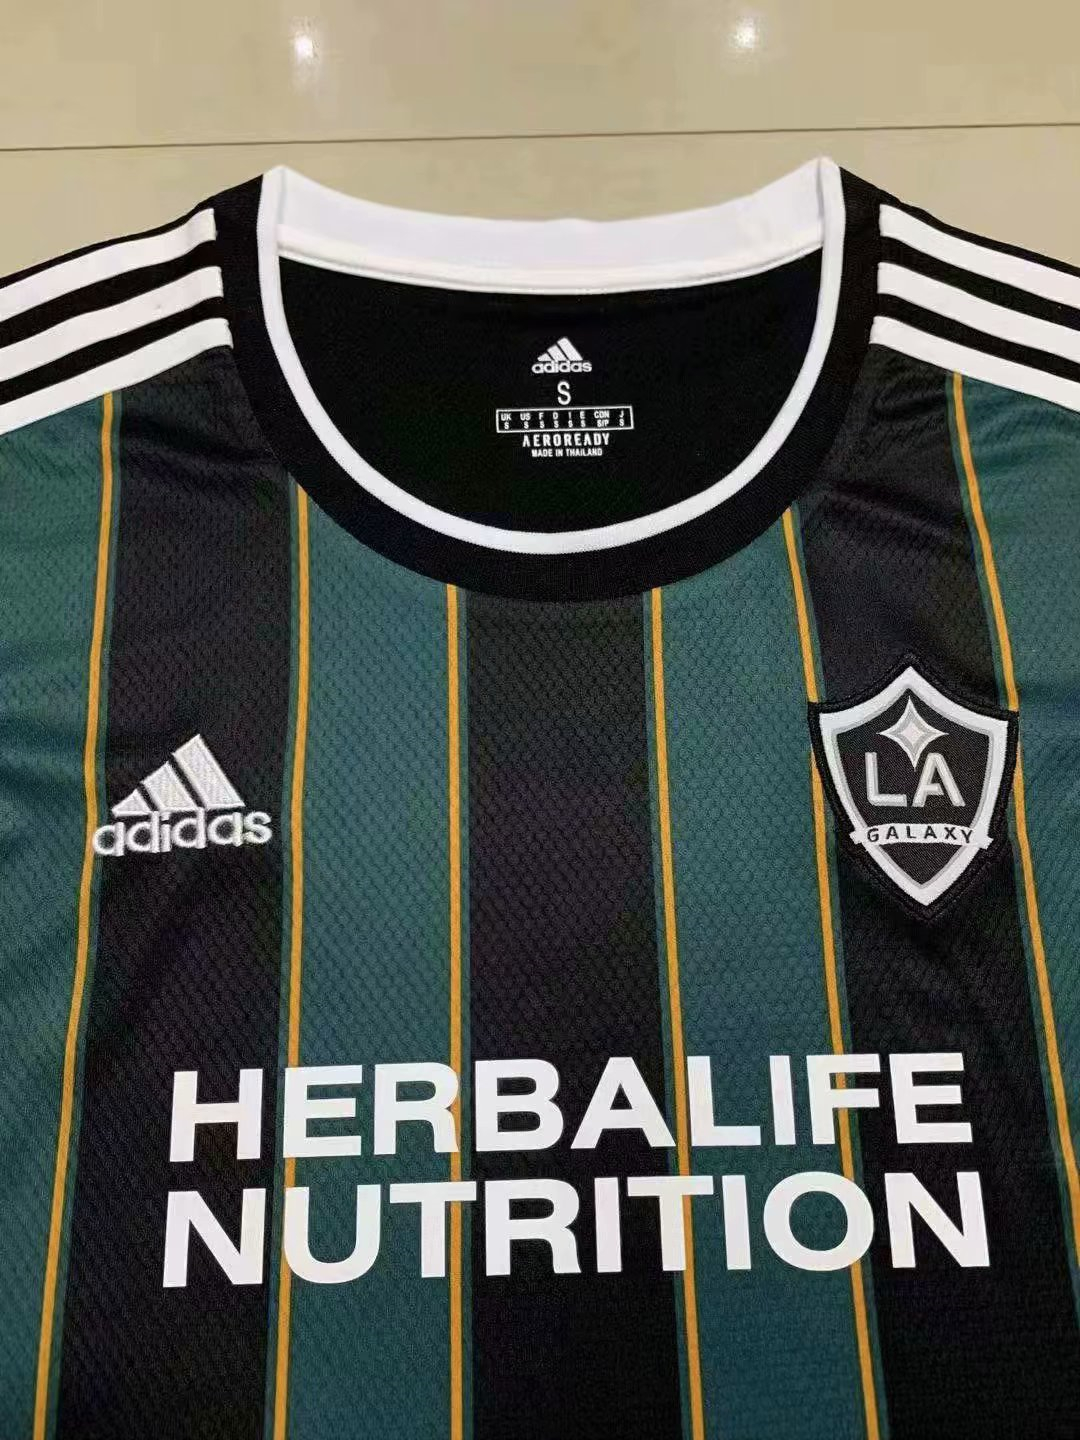 2021/22 Los Angeles Galaxy Home Womens Soccer Jersey Replica 